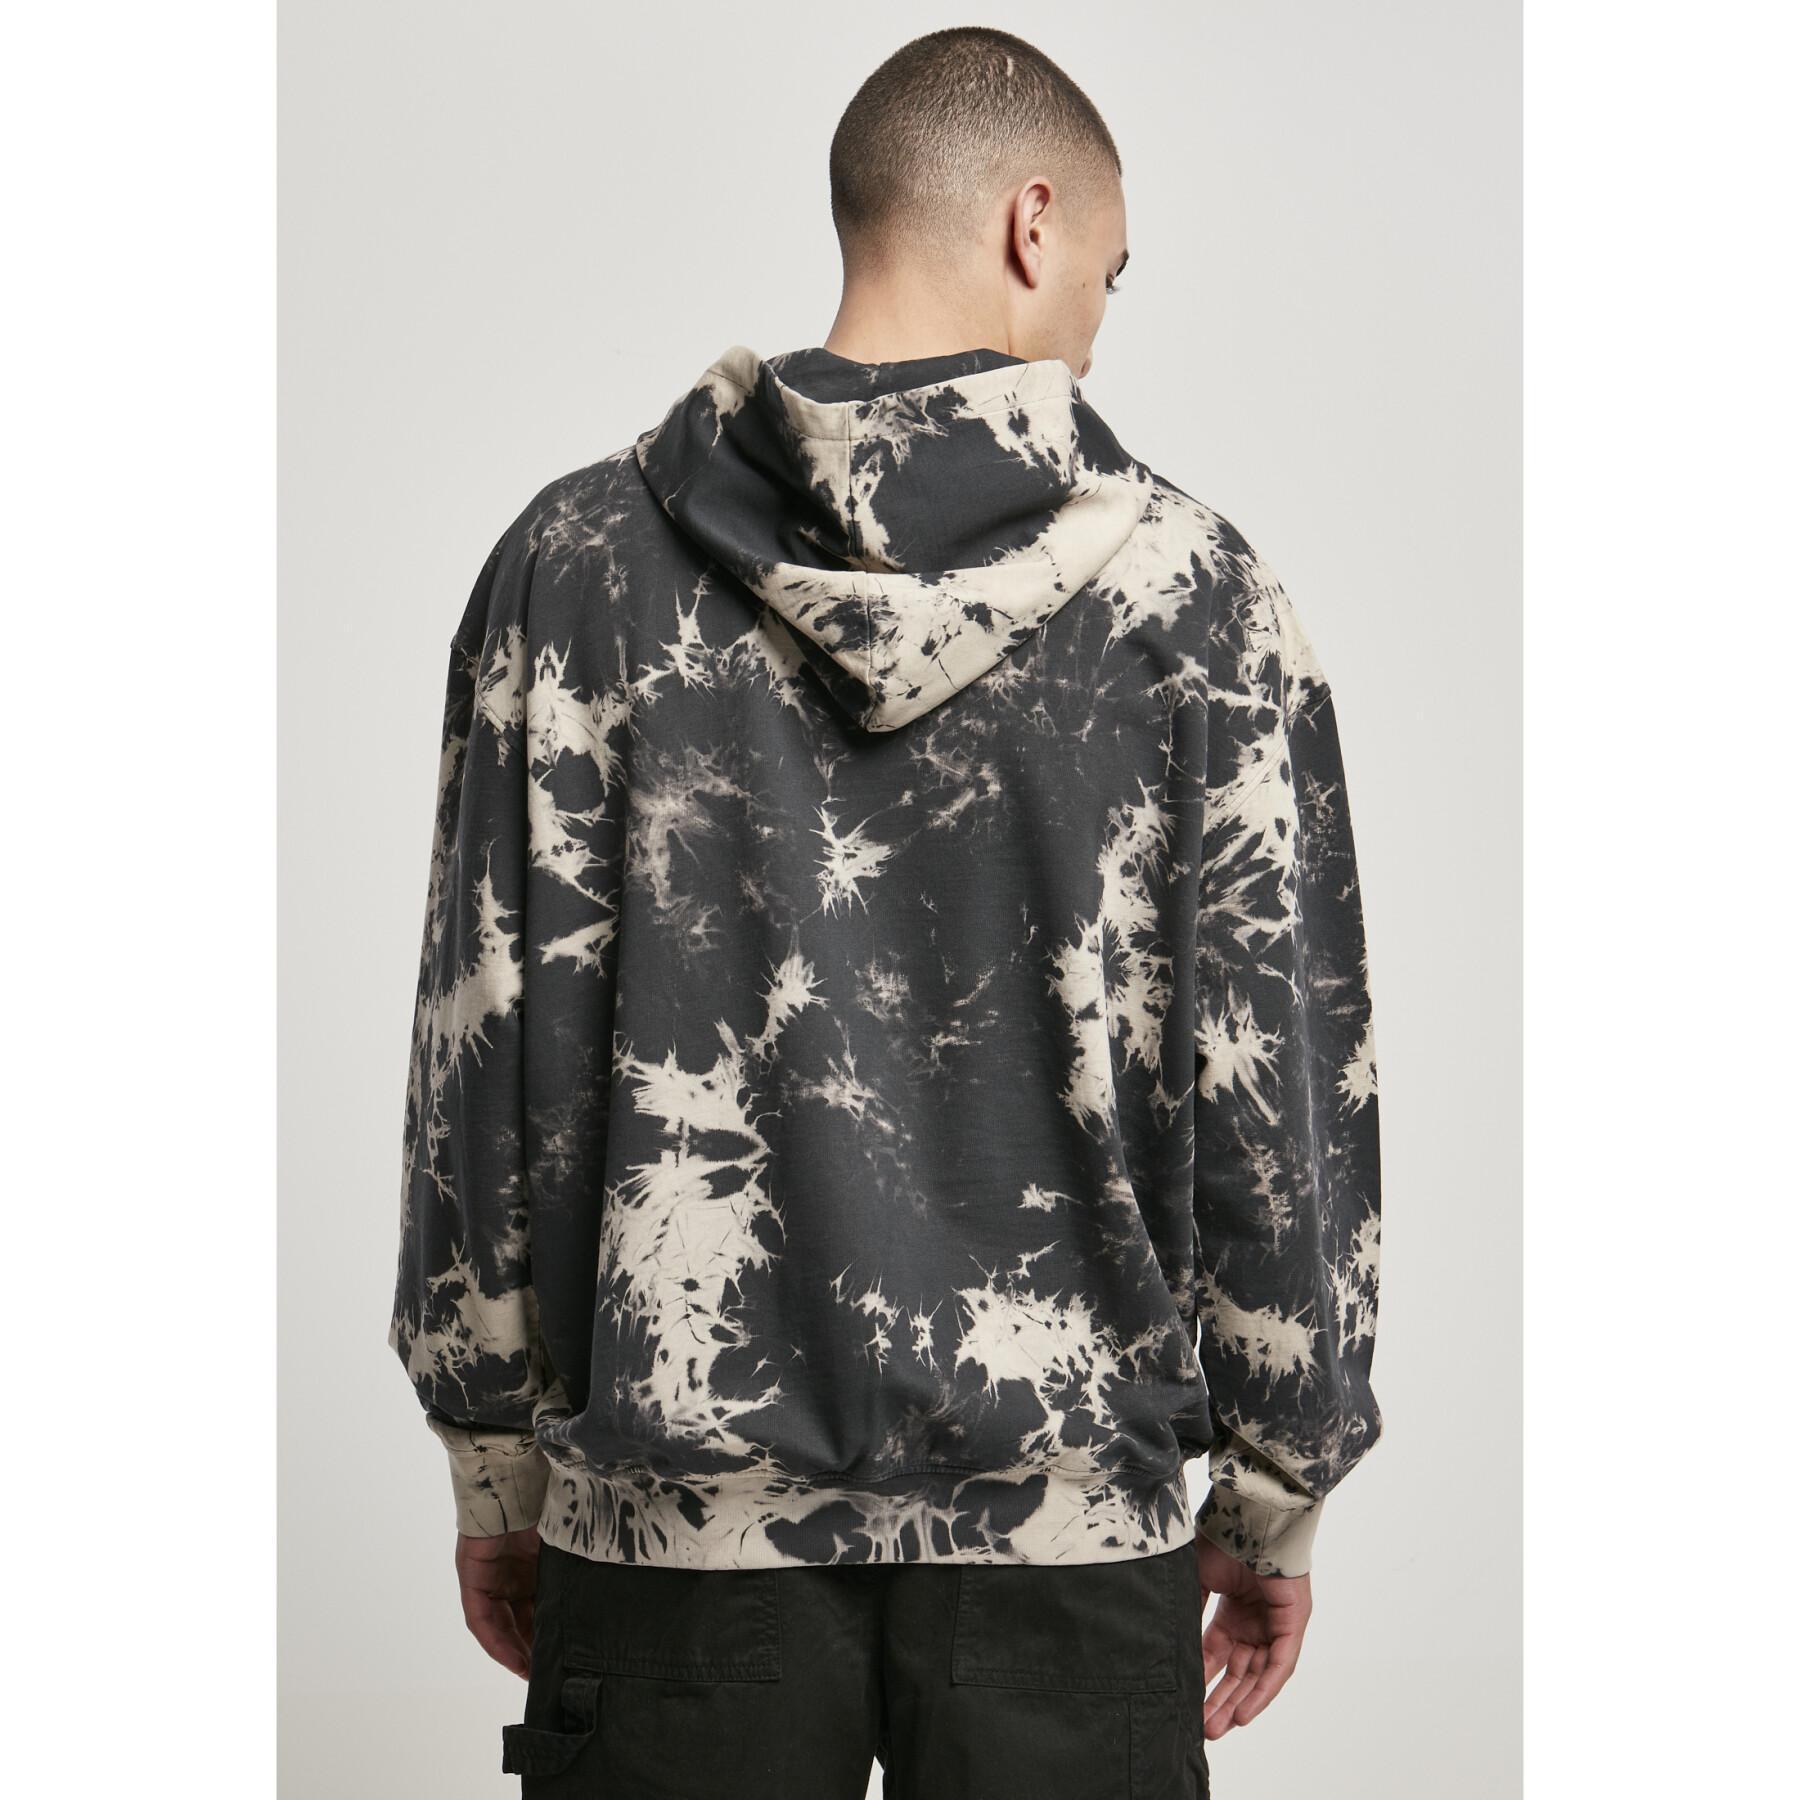 Hoodie Urban Classics bleached (Grandes tailles)